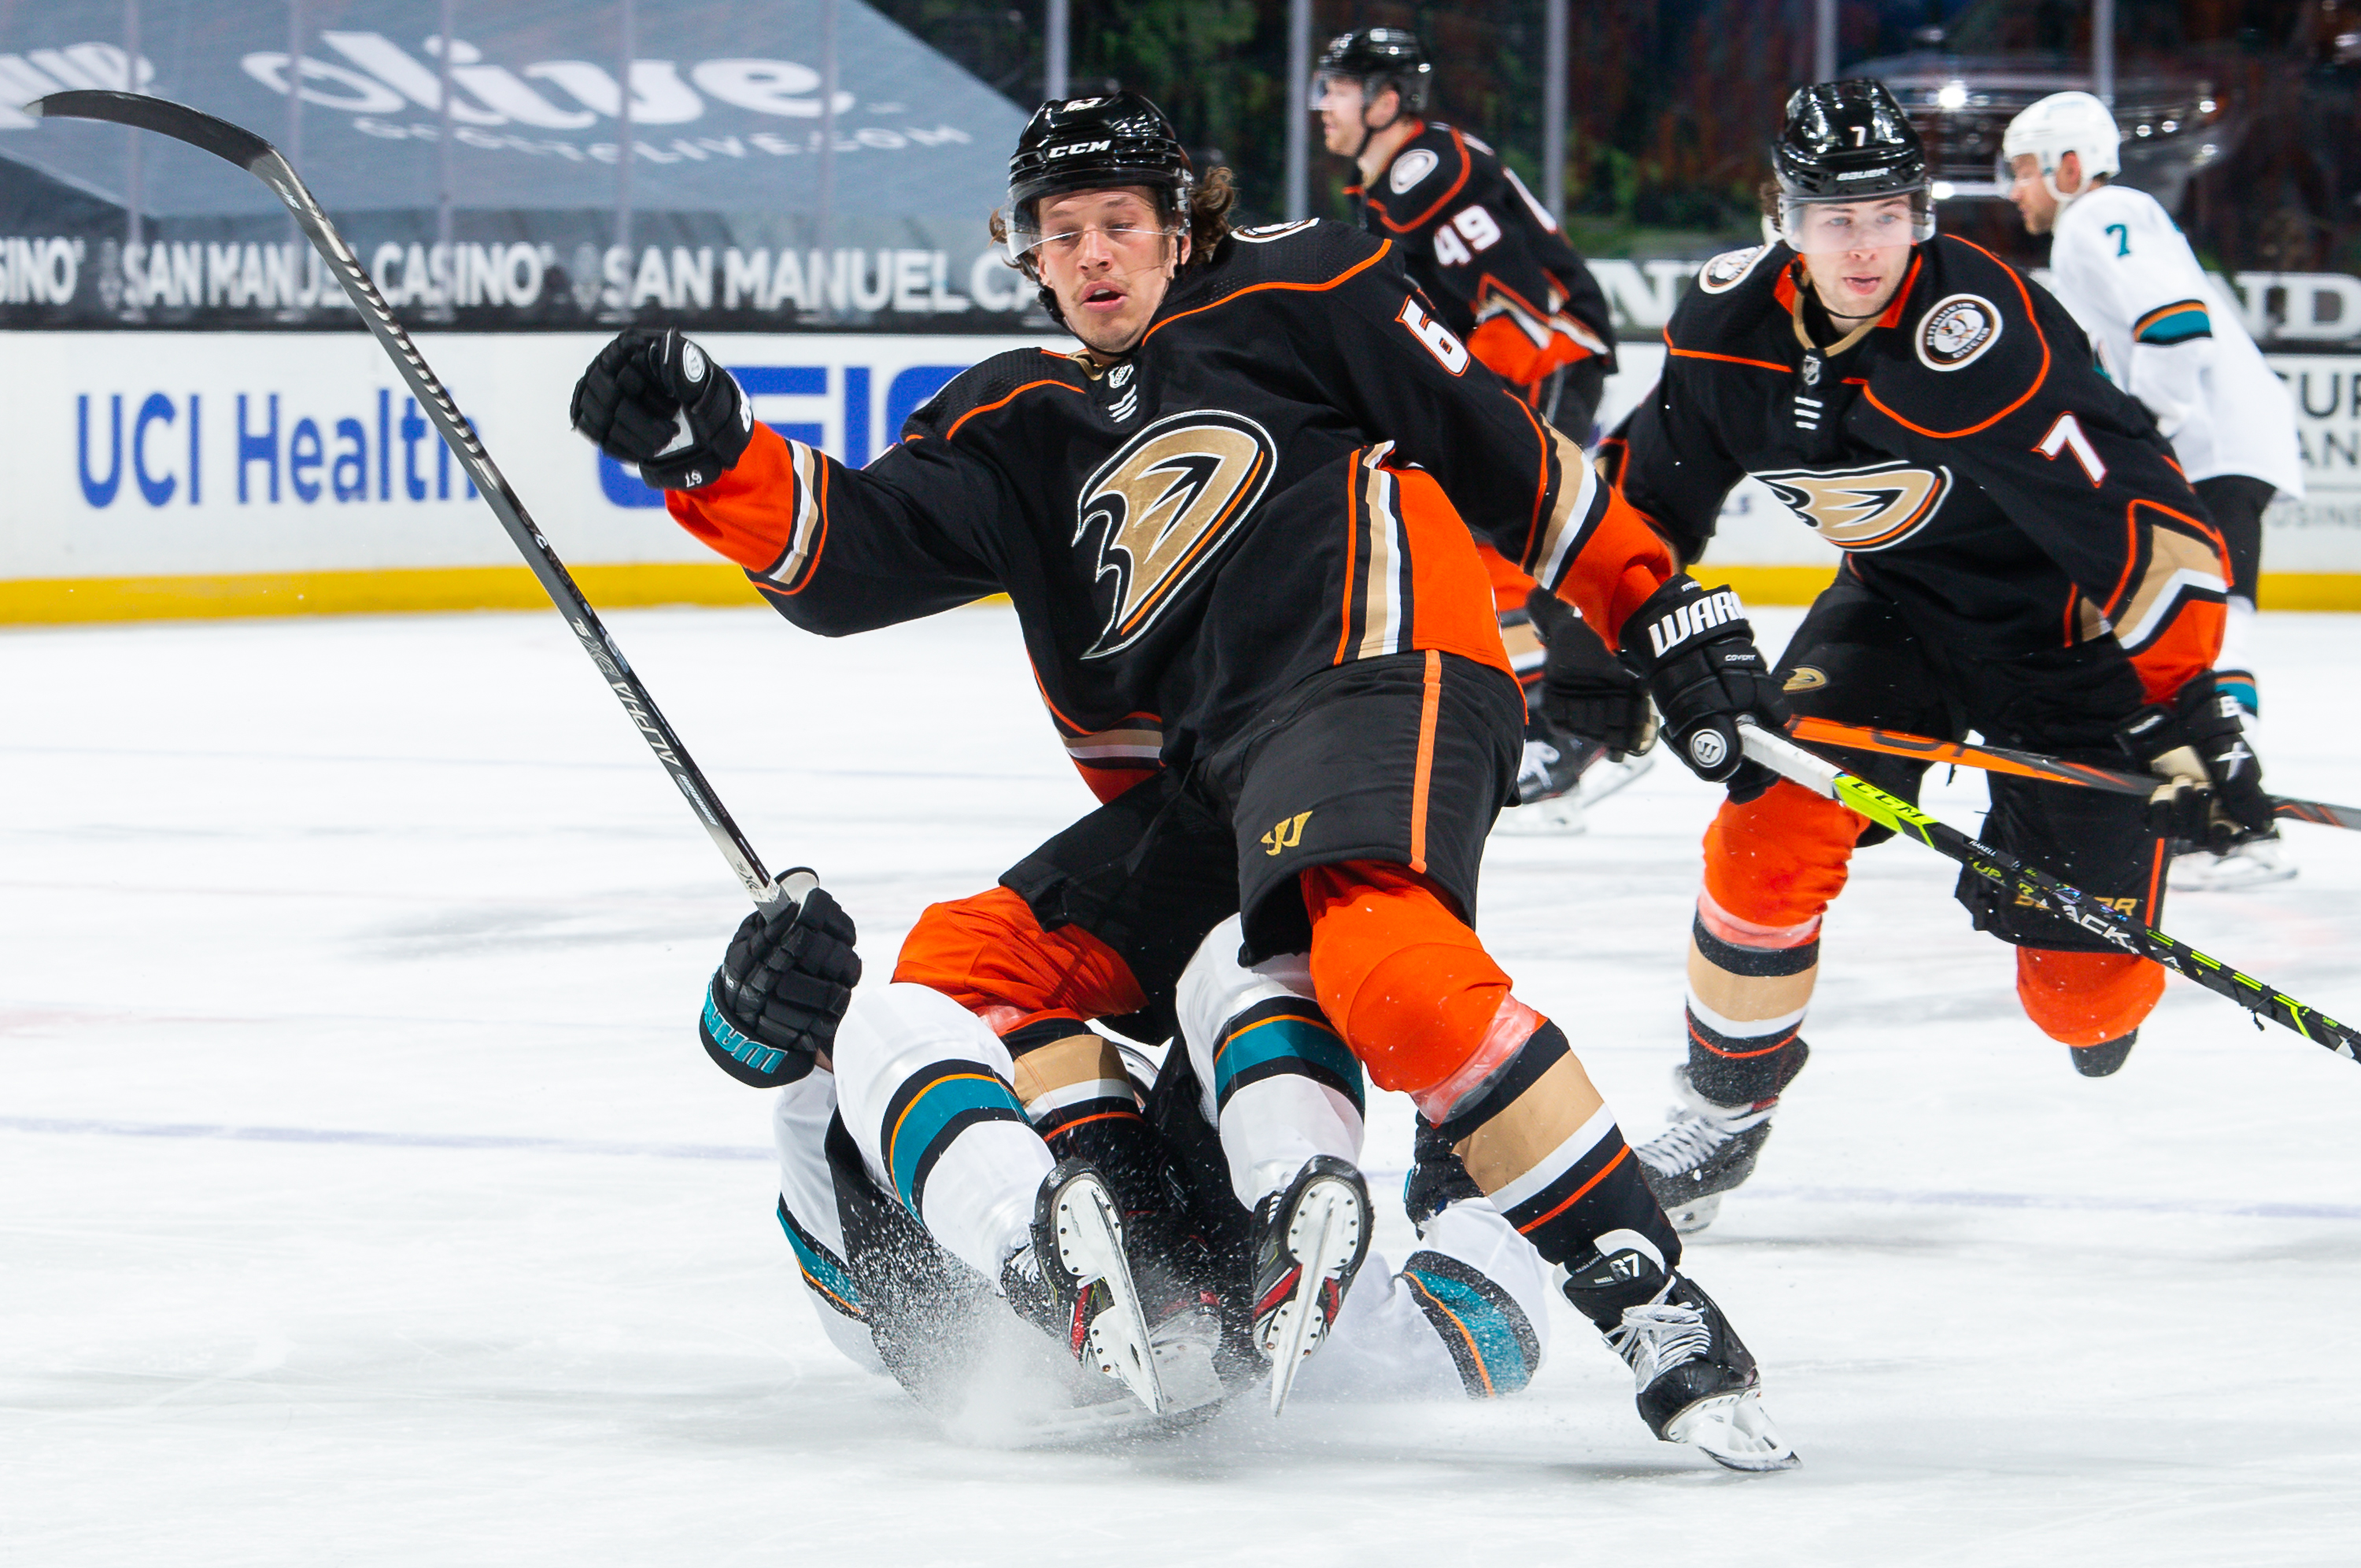 Rickard Rakell #67 of the Anaheim Ducks collides with Ryan Donato #16 of the San Jose Sharks as Ben Hutton #7 of the Anaheim Ducks skates past during the third period of the game at Honda Center on March 12, 2021 in Anaheim, California.